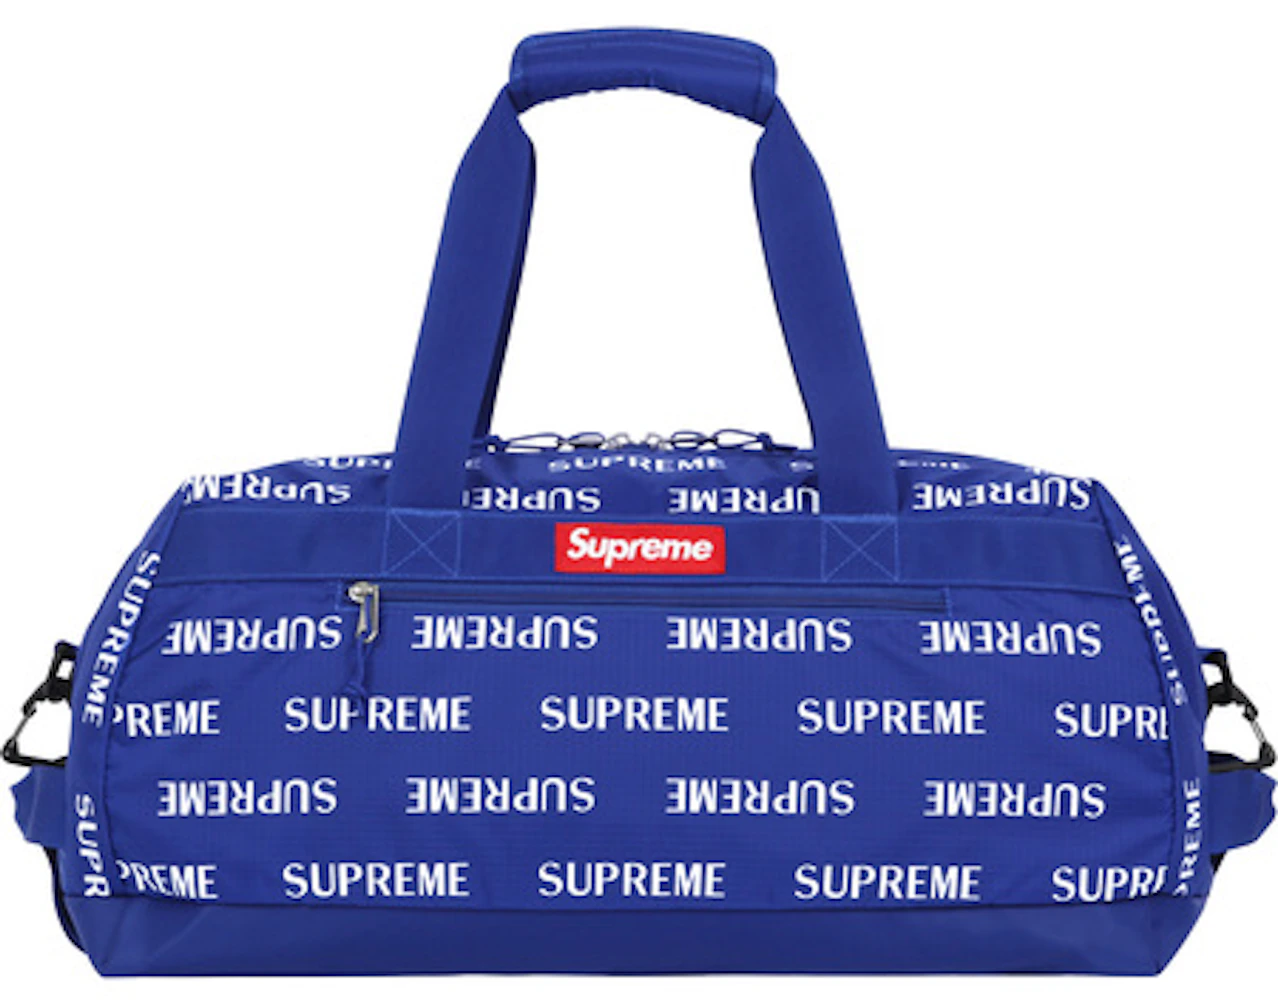 Check out the Supreme Duffle Bag White available on StockX